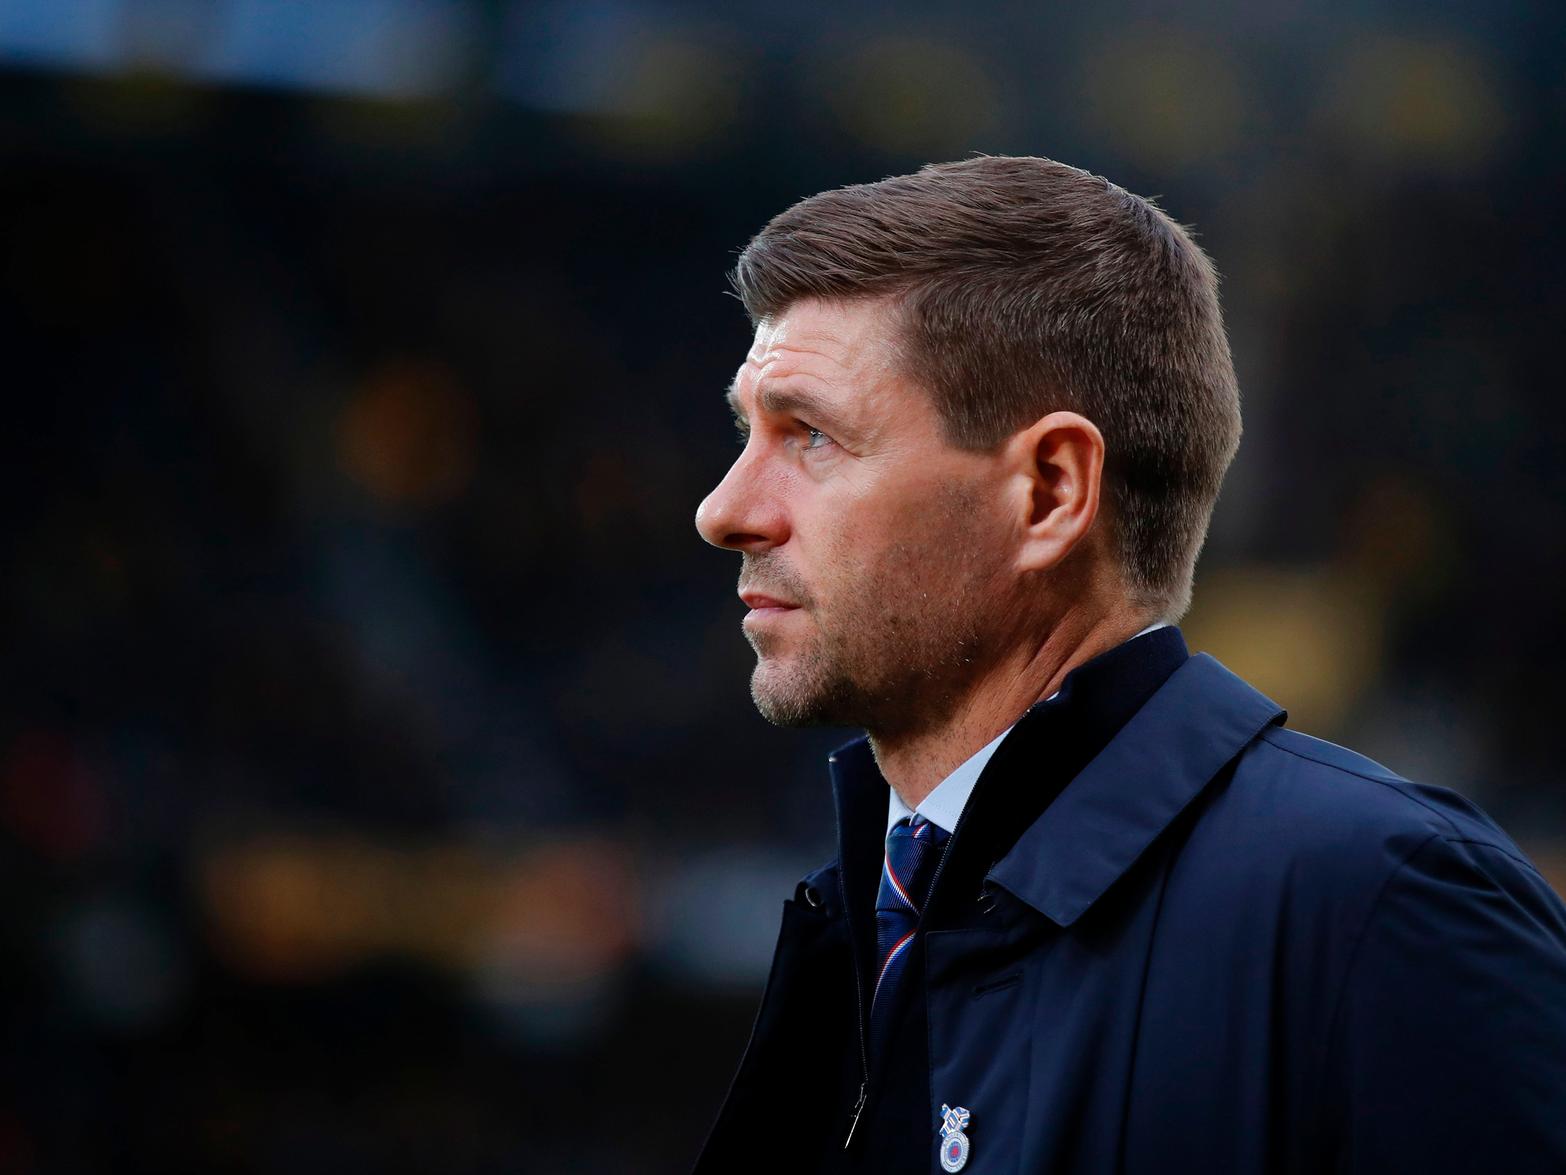 Leeds United have been tipped with a shock move for Rangers manager Steven Gerrard, should Marcelo Bielsa decide to leave the Whites upon the expiry of his current deal next summer. (The Sun)